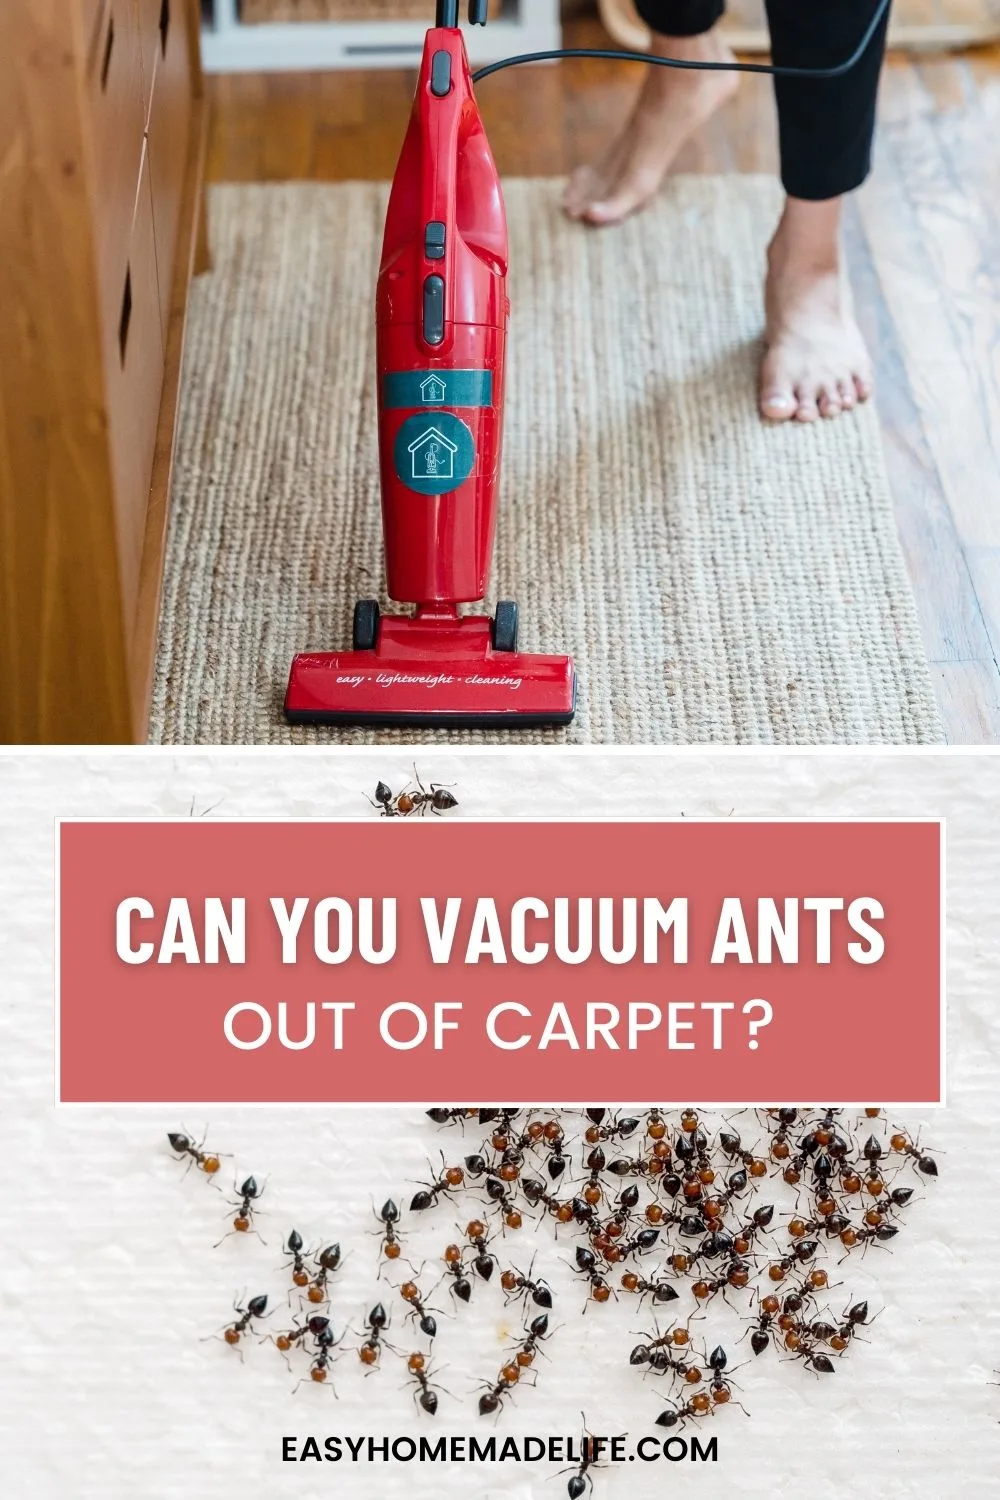 Can you vacuum ants out of carpet?